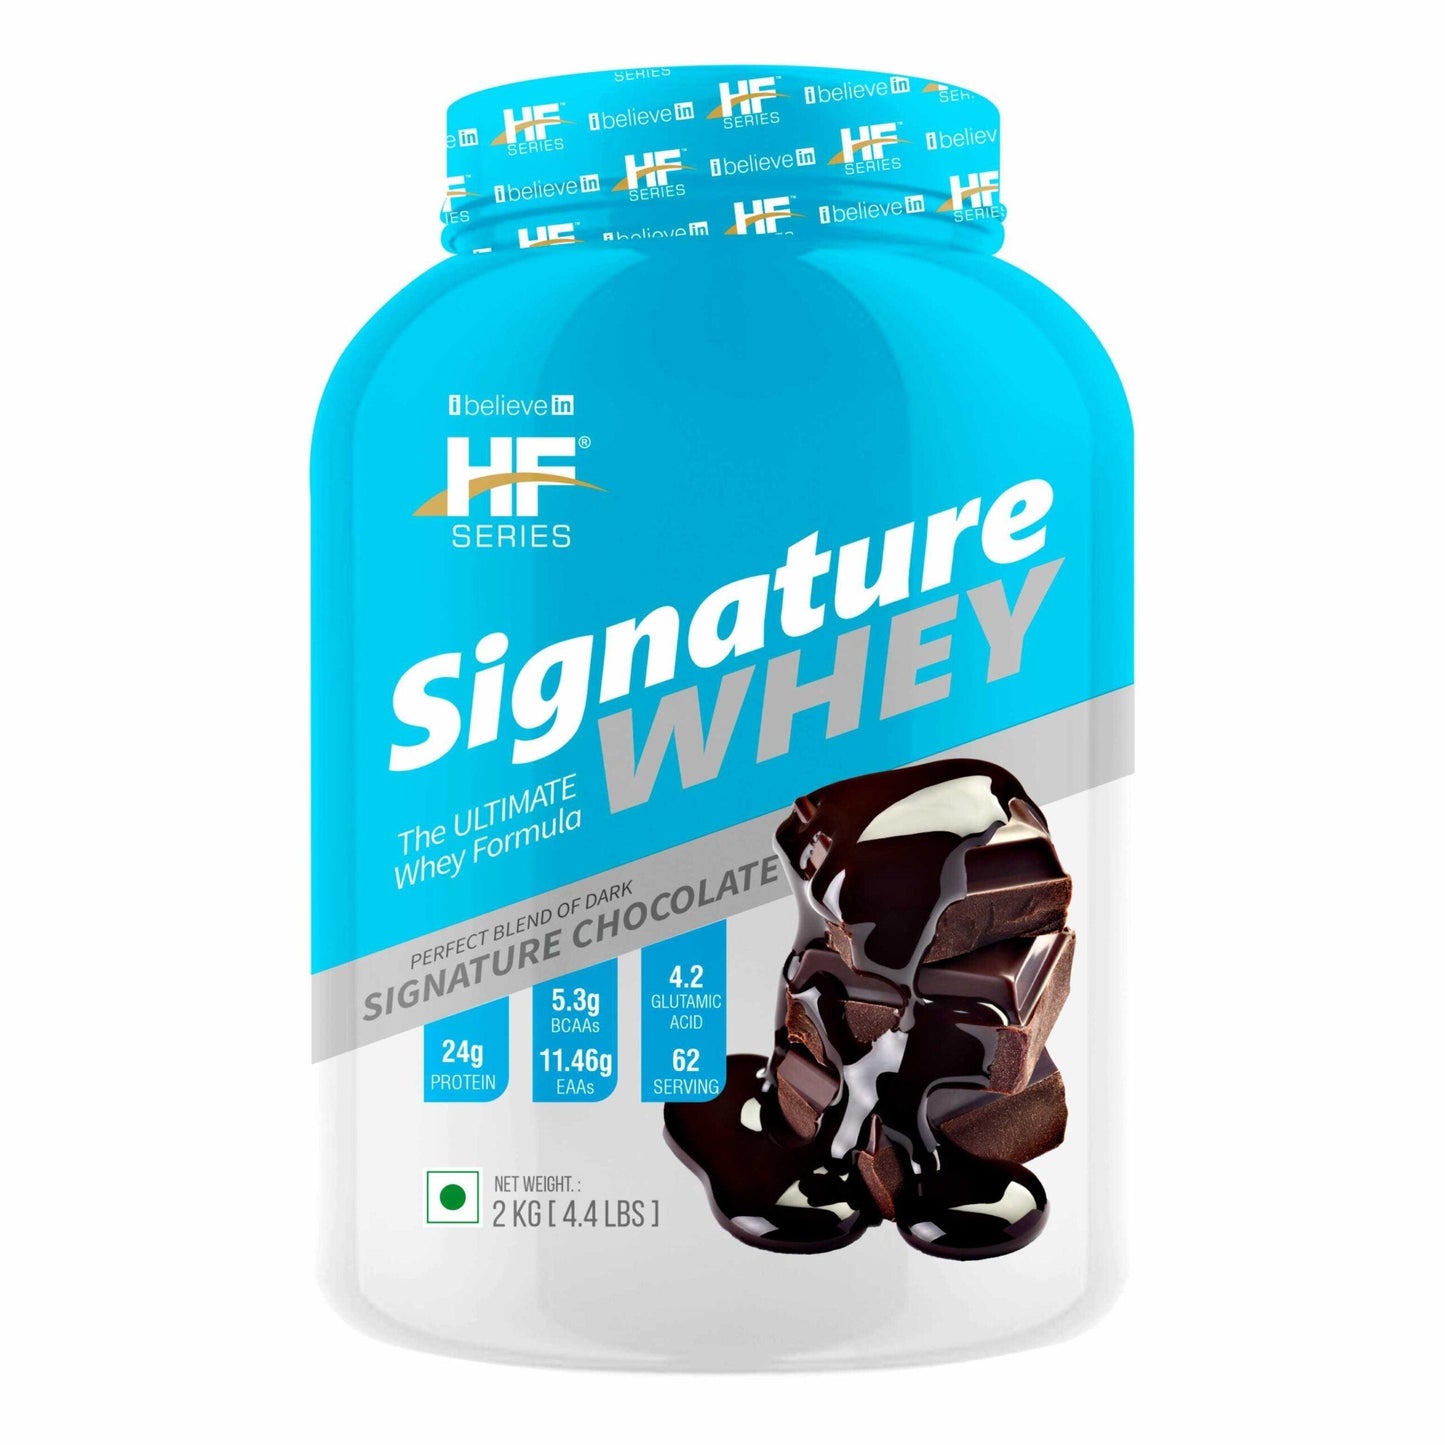 HF Series Signature Whey protein Powder|With added EAA and Glutamine|62 servings|Build Lean and Bigger Muscles|2Kg|Flavour- Chocolate Hazelnut - The Muscle Kart.com